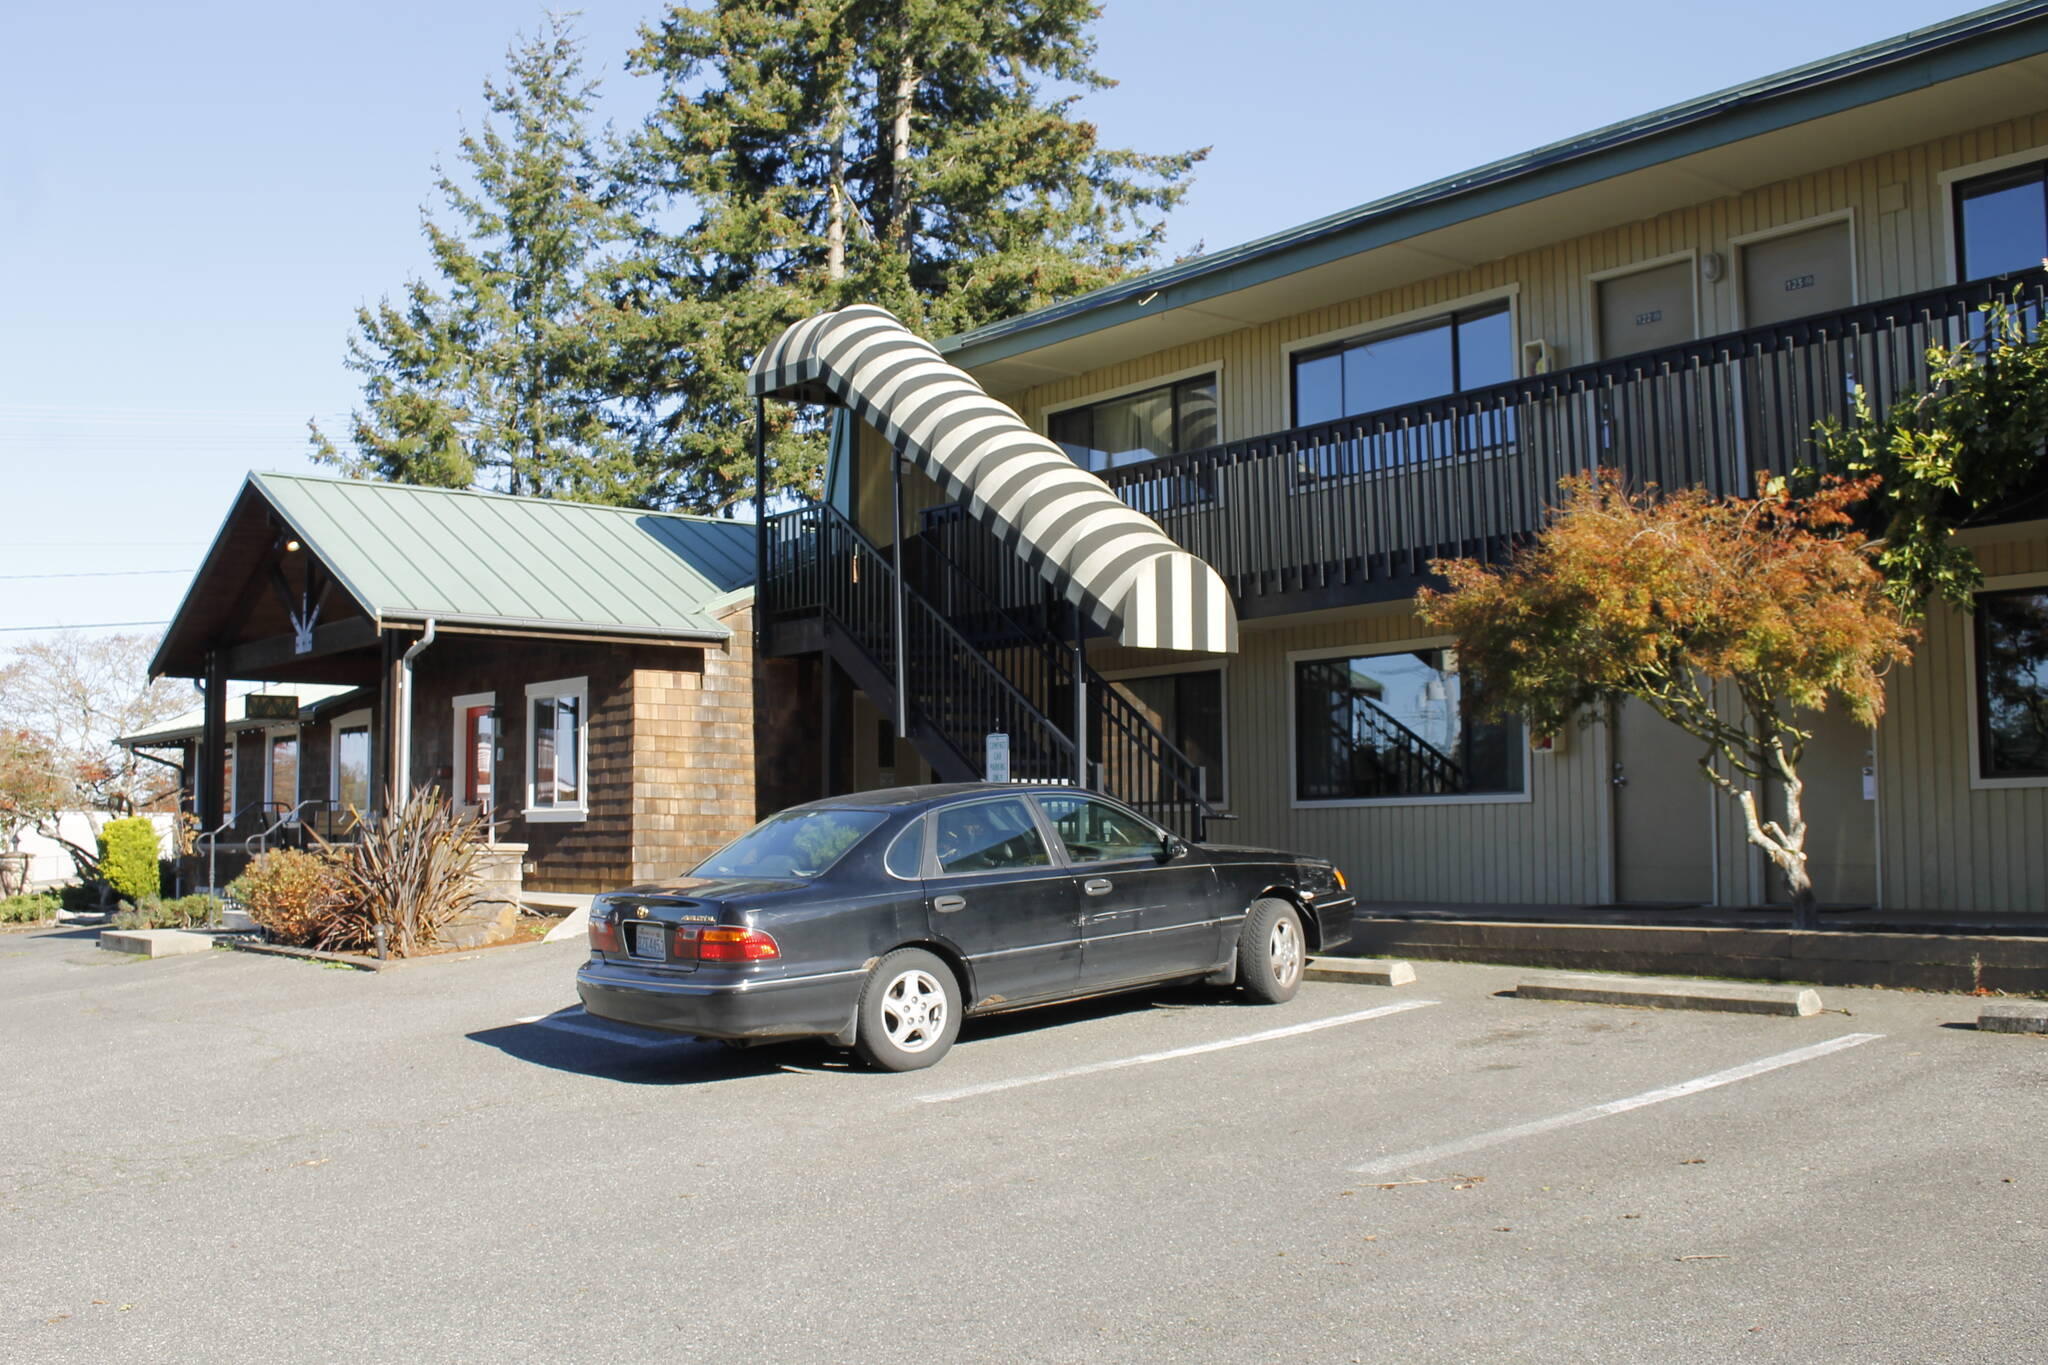 File photo by Kira Erickson/South Whidbey Record
The Harbor Inn in Freeland is set to re-open this spring as short-term housing for those in danger of becoming homeless.